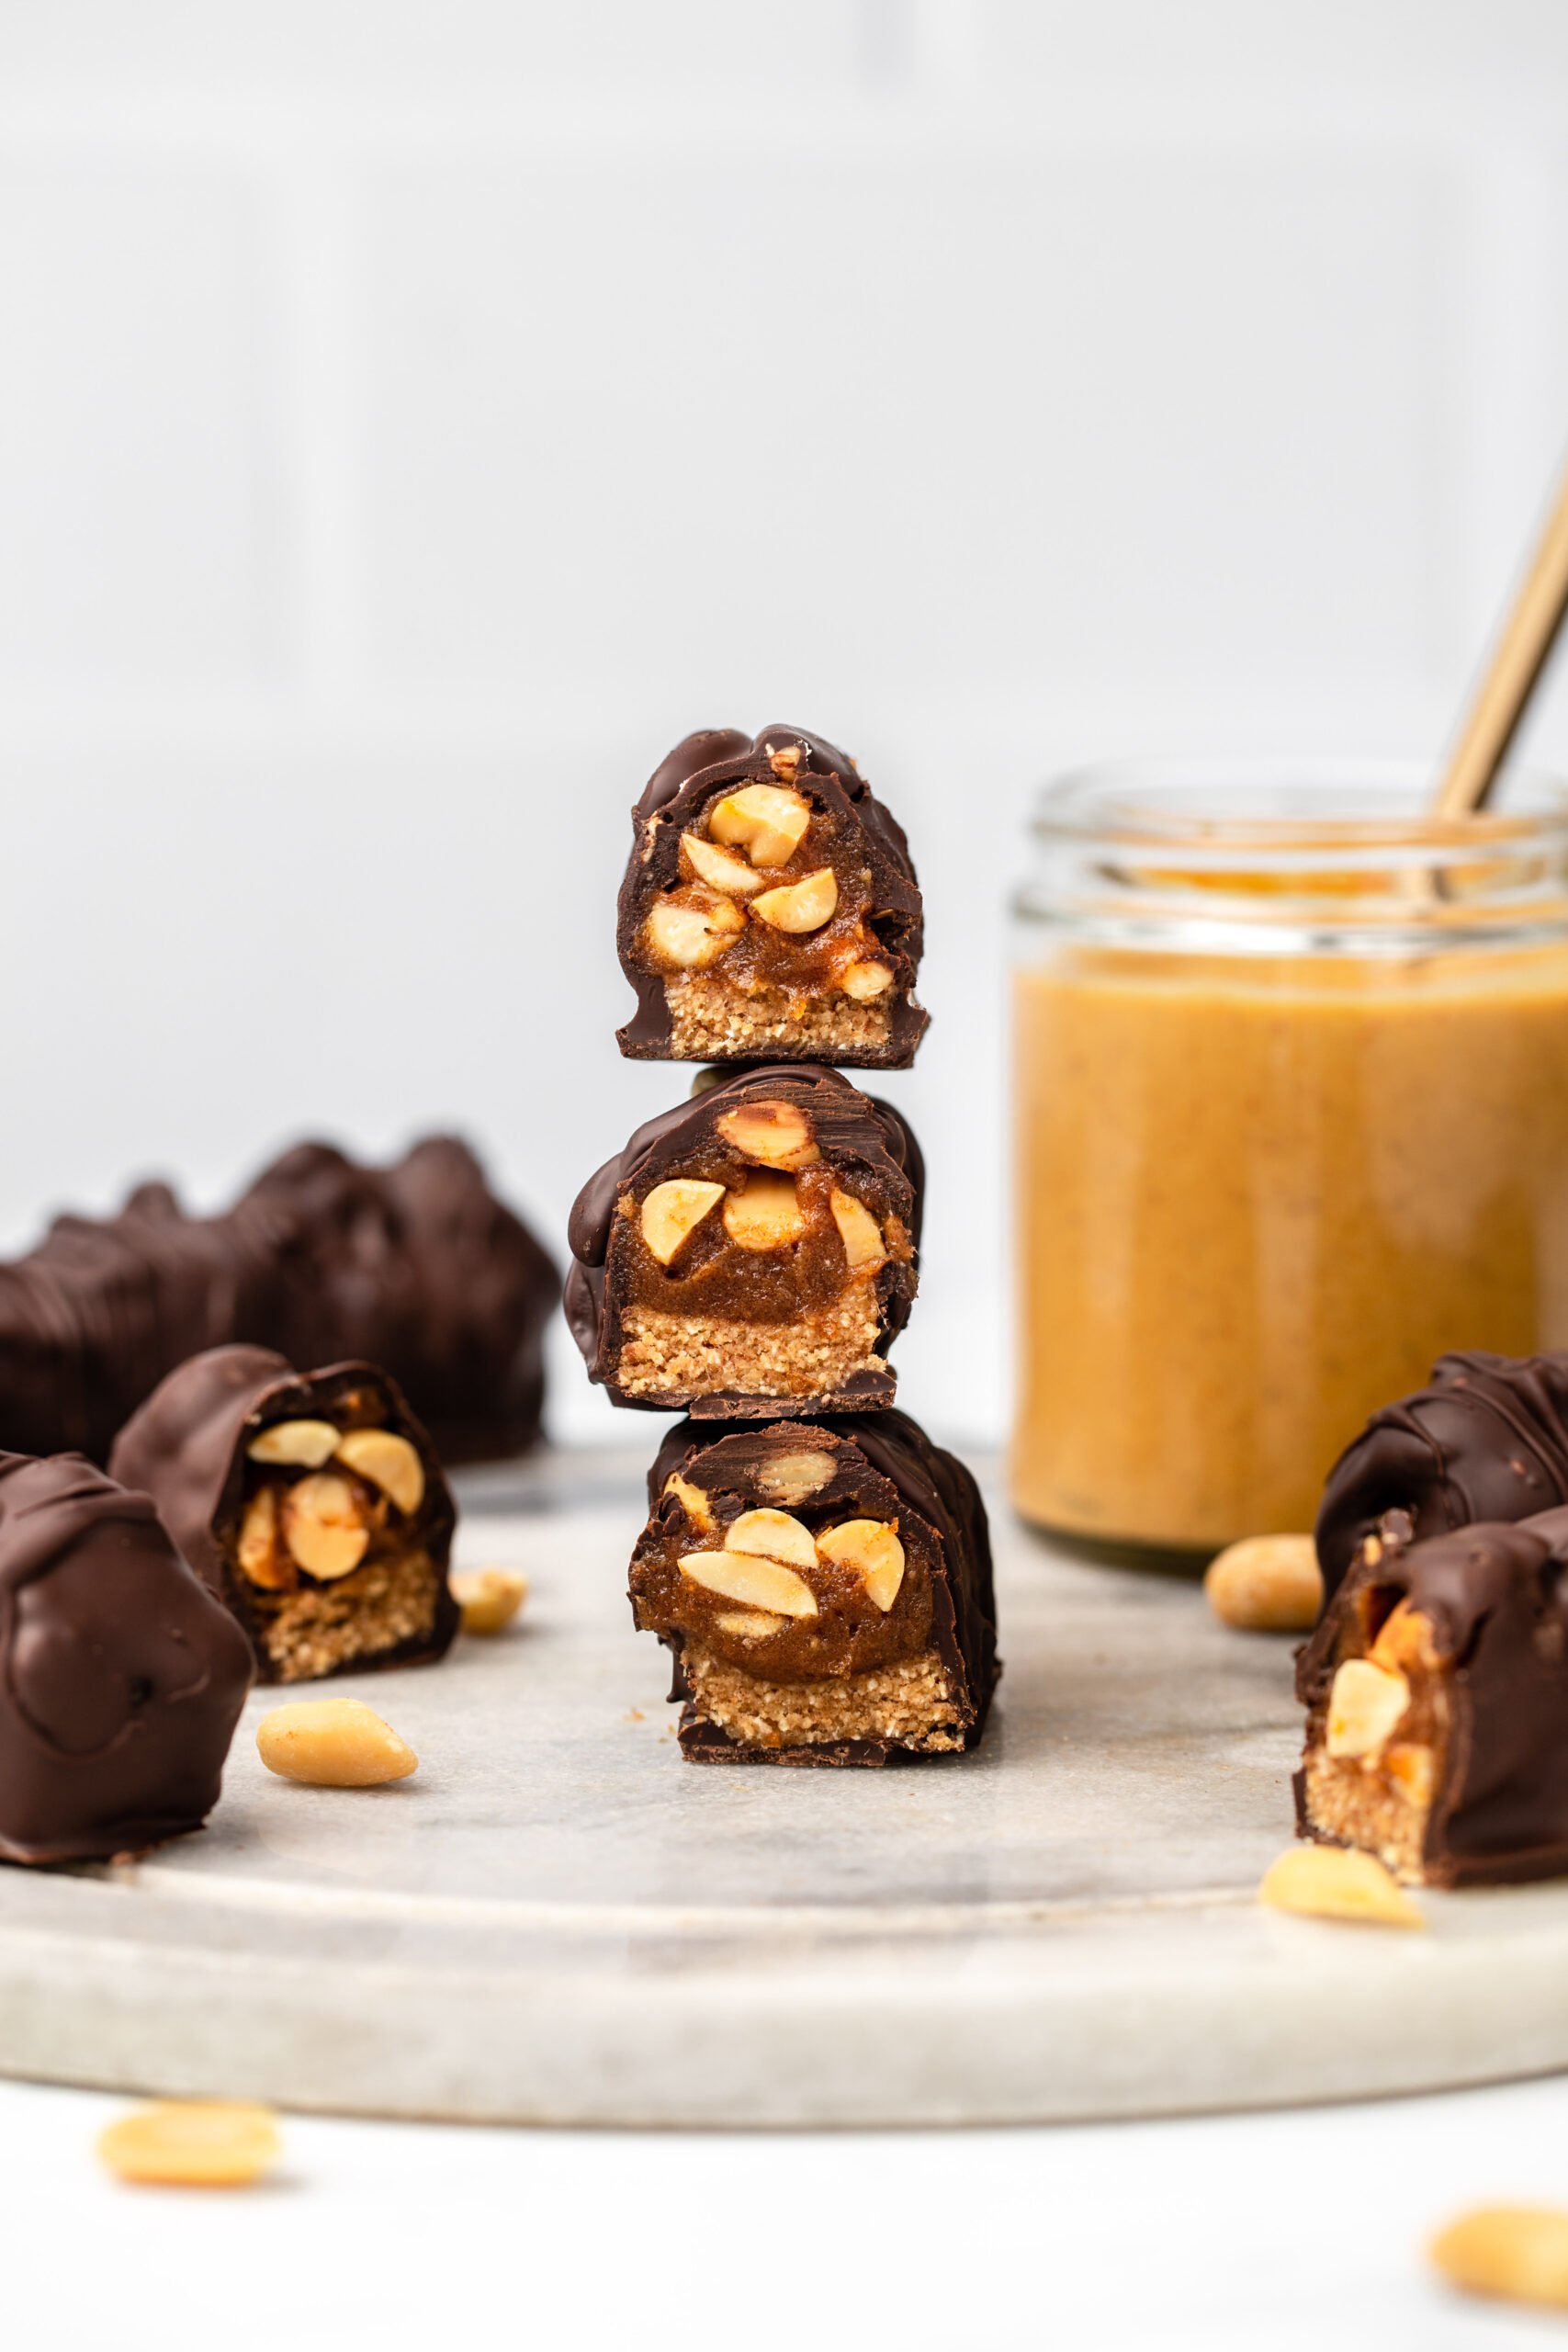 Vegan Snickers Bars (Healthy + 6 Ingredients!) - From My Bowl